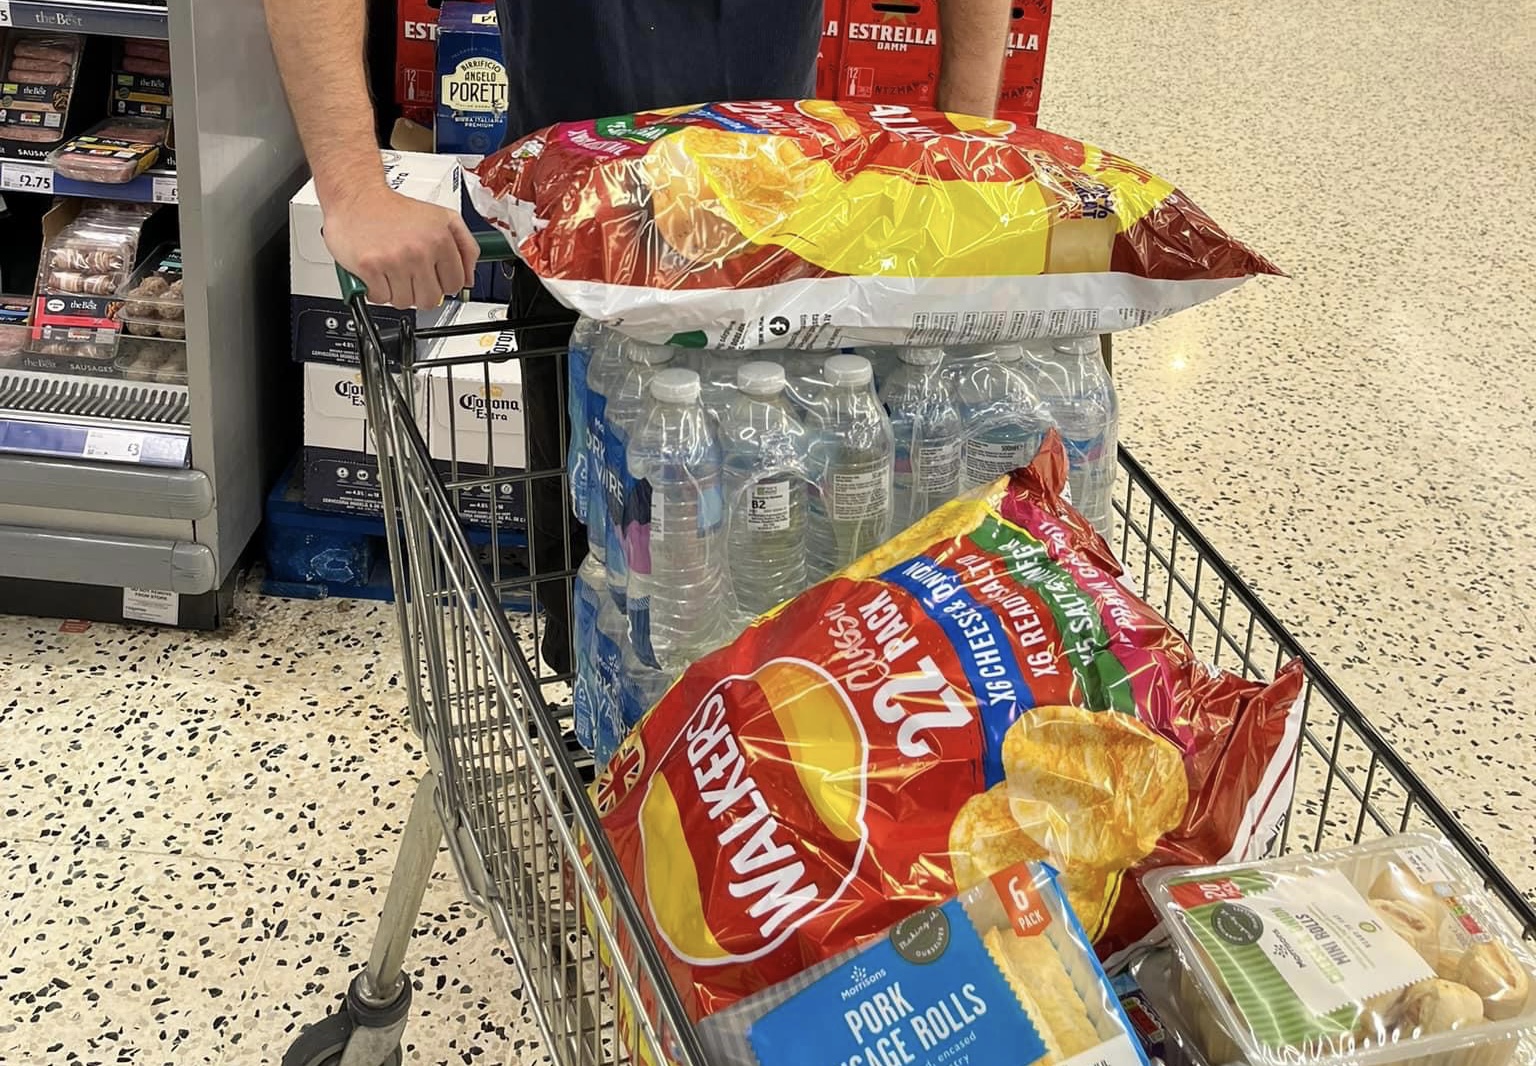 NEWS | Morrisons provide free food and drink for fire crews tackling devastating house fire in Leominster